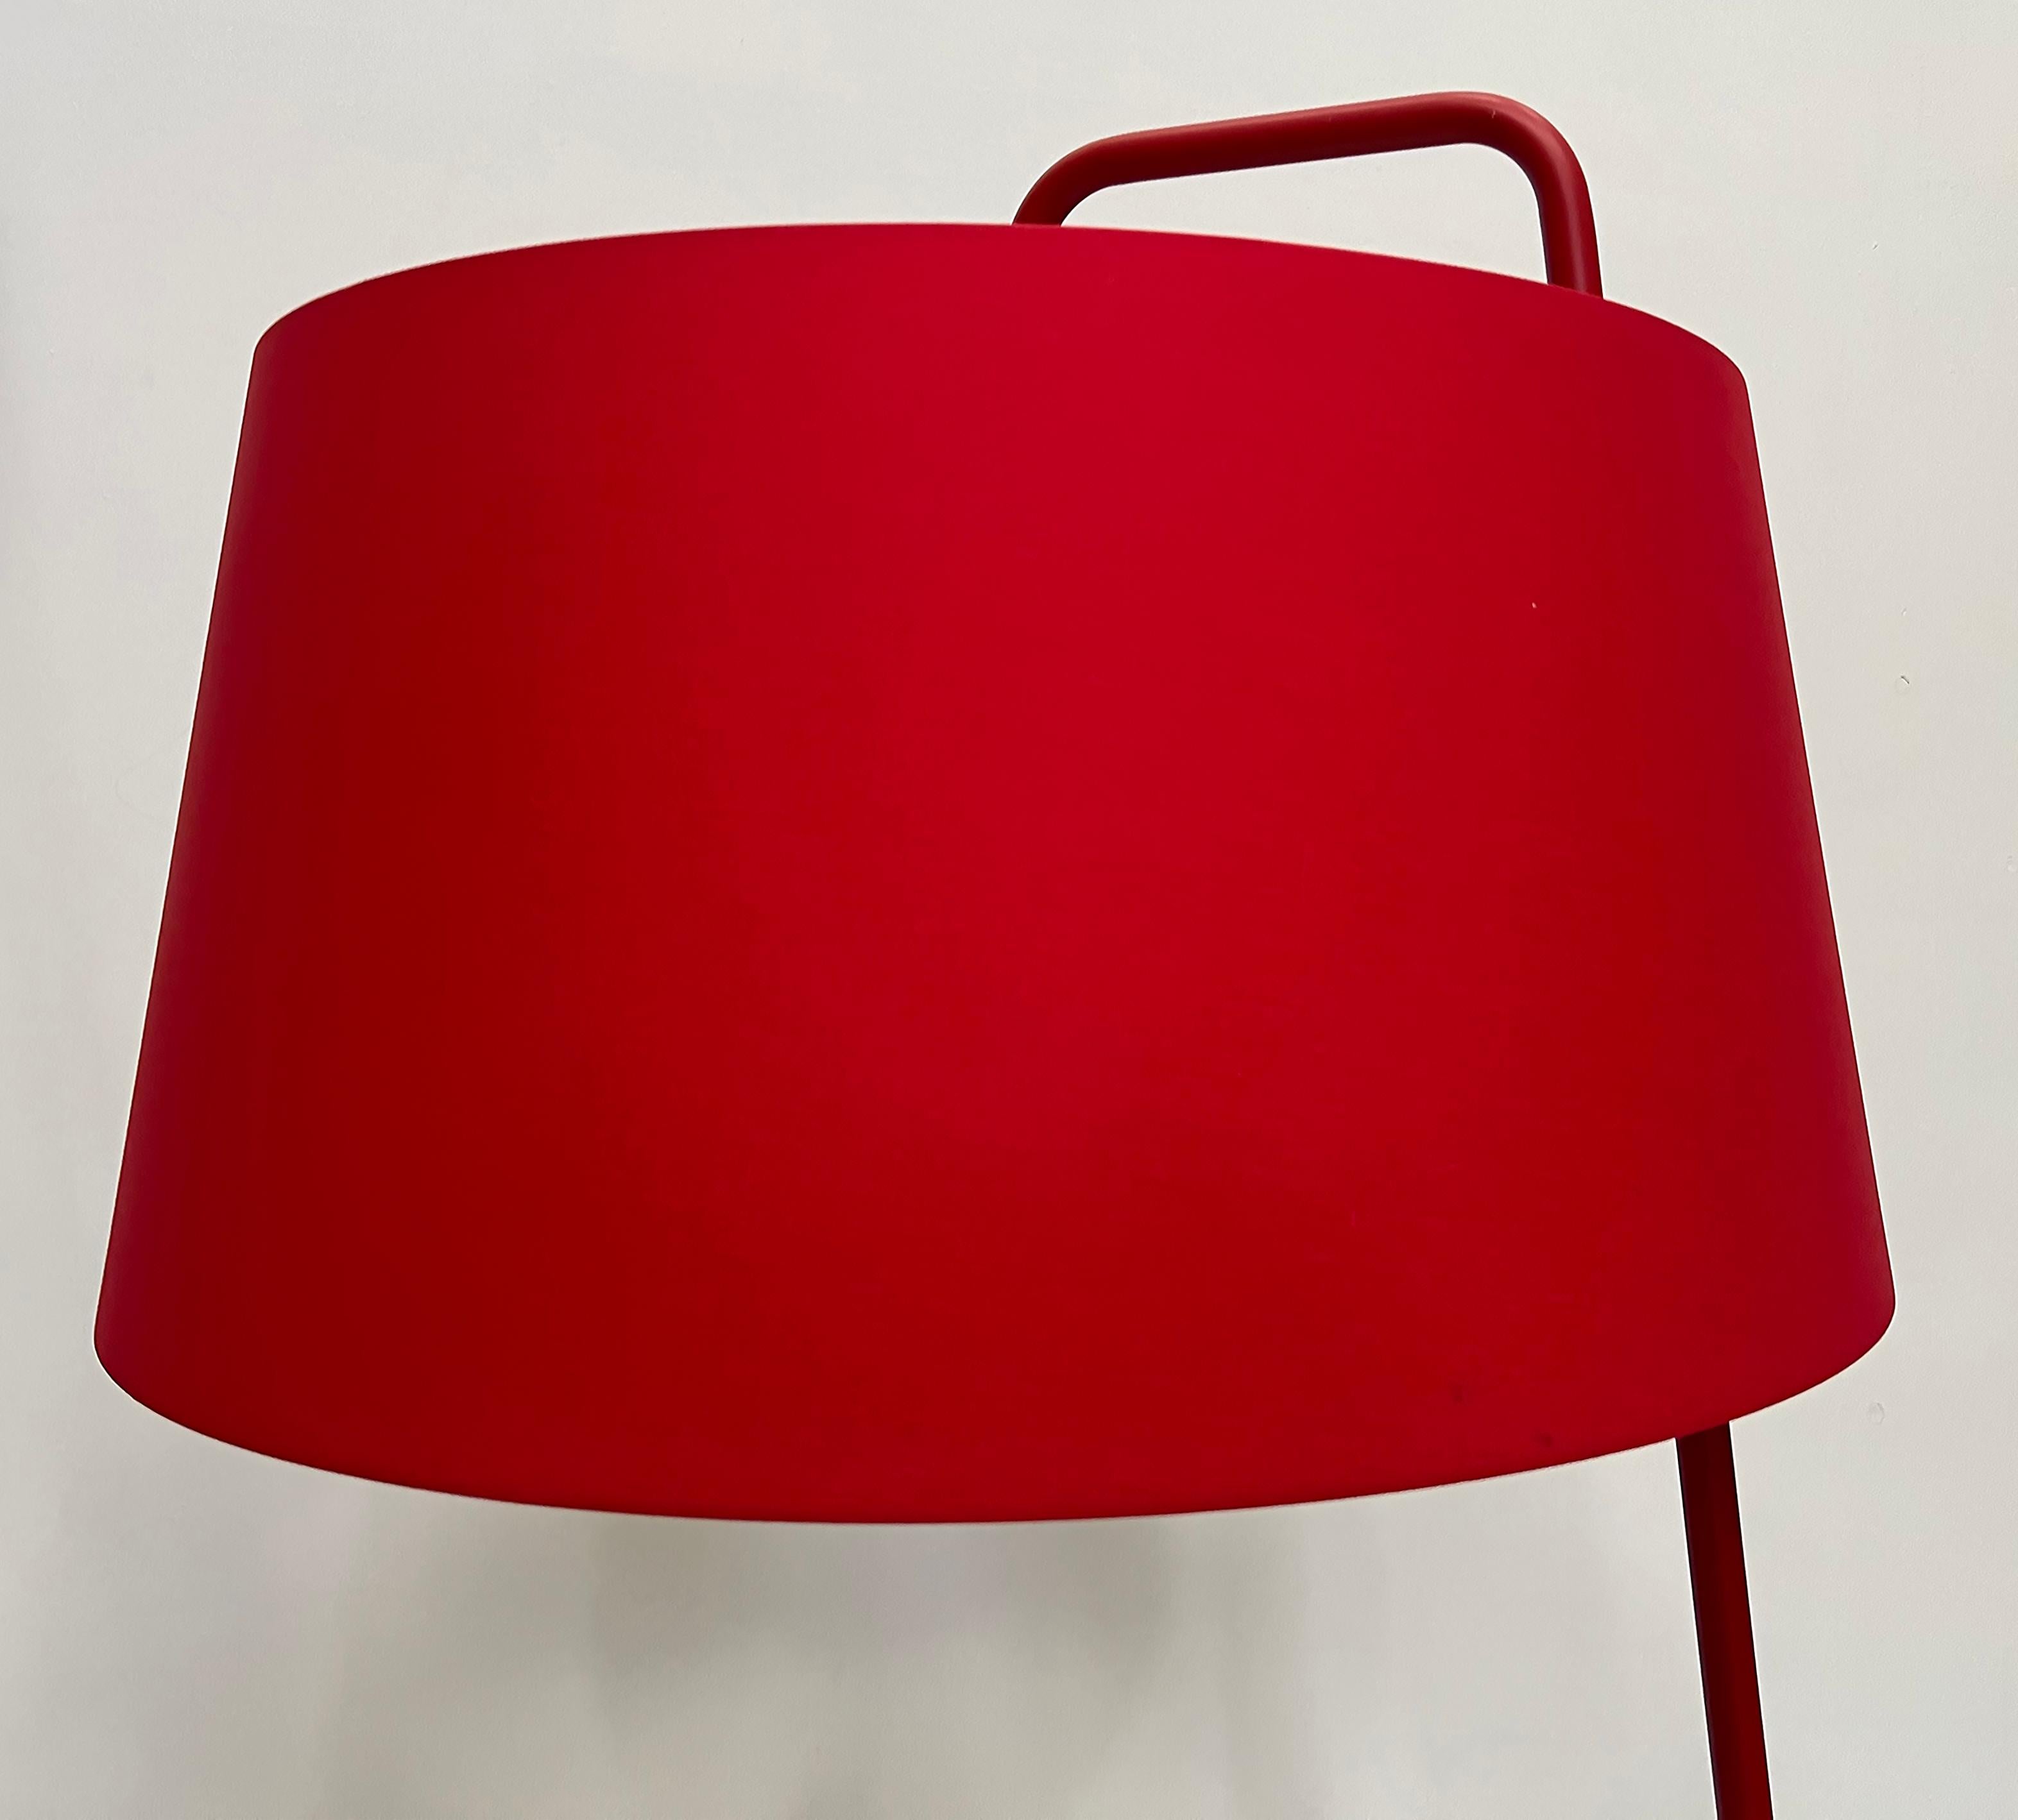 Painted Like New Calligaris Sextans Floor Lamp in Red from Italy For Sale